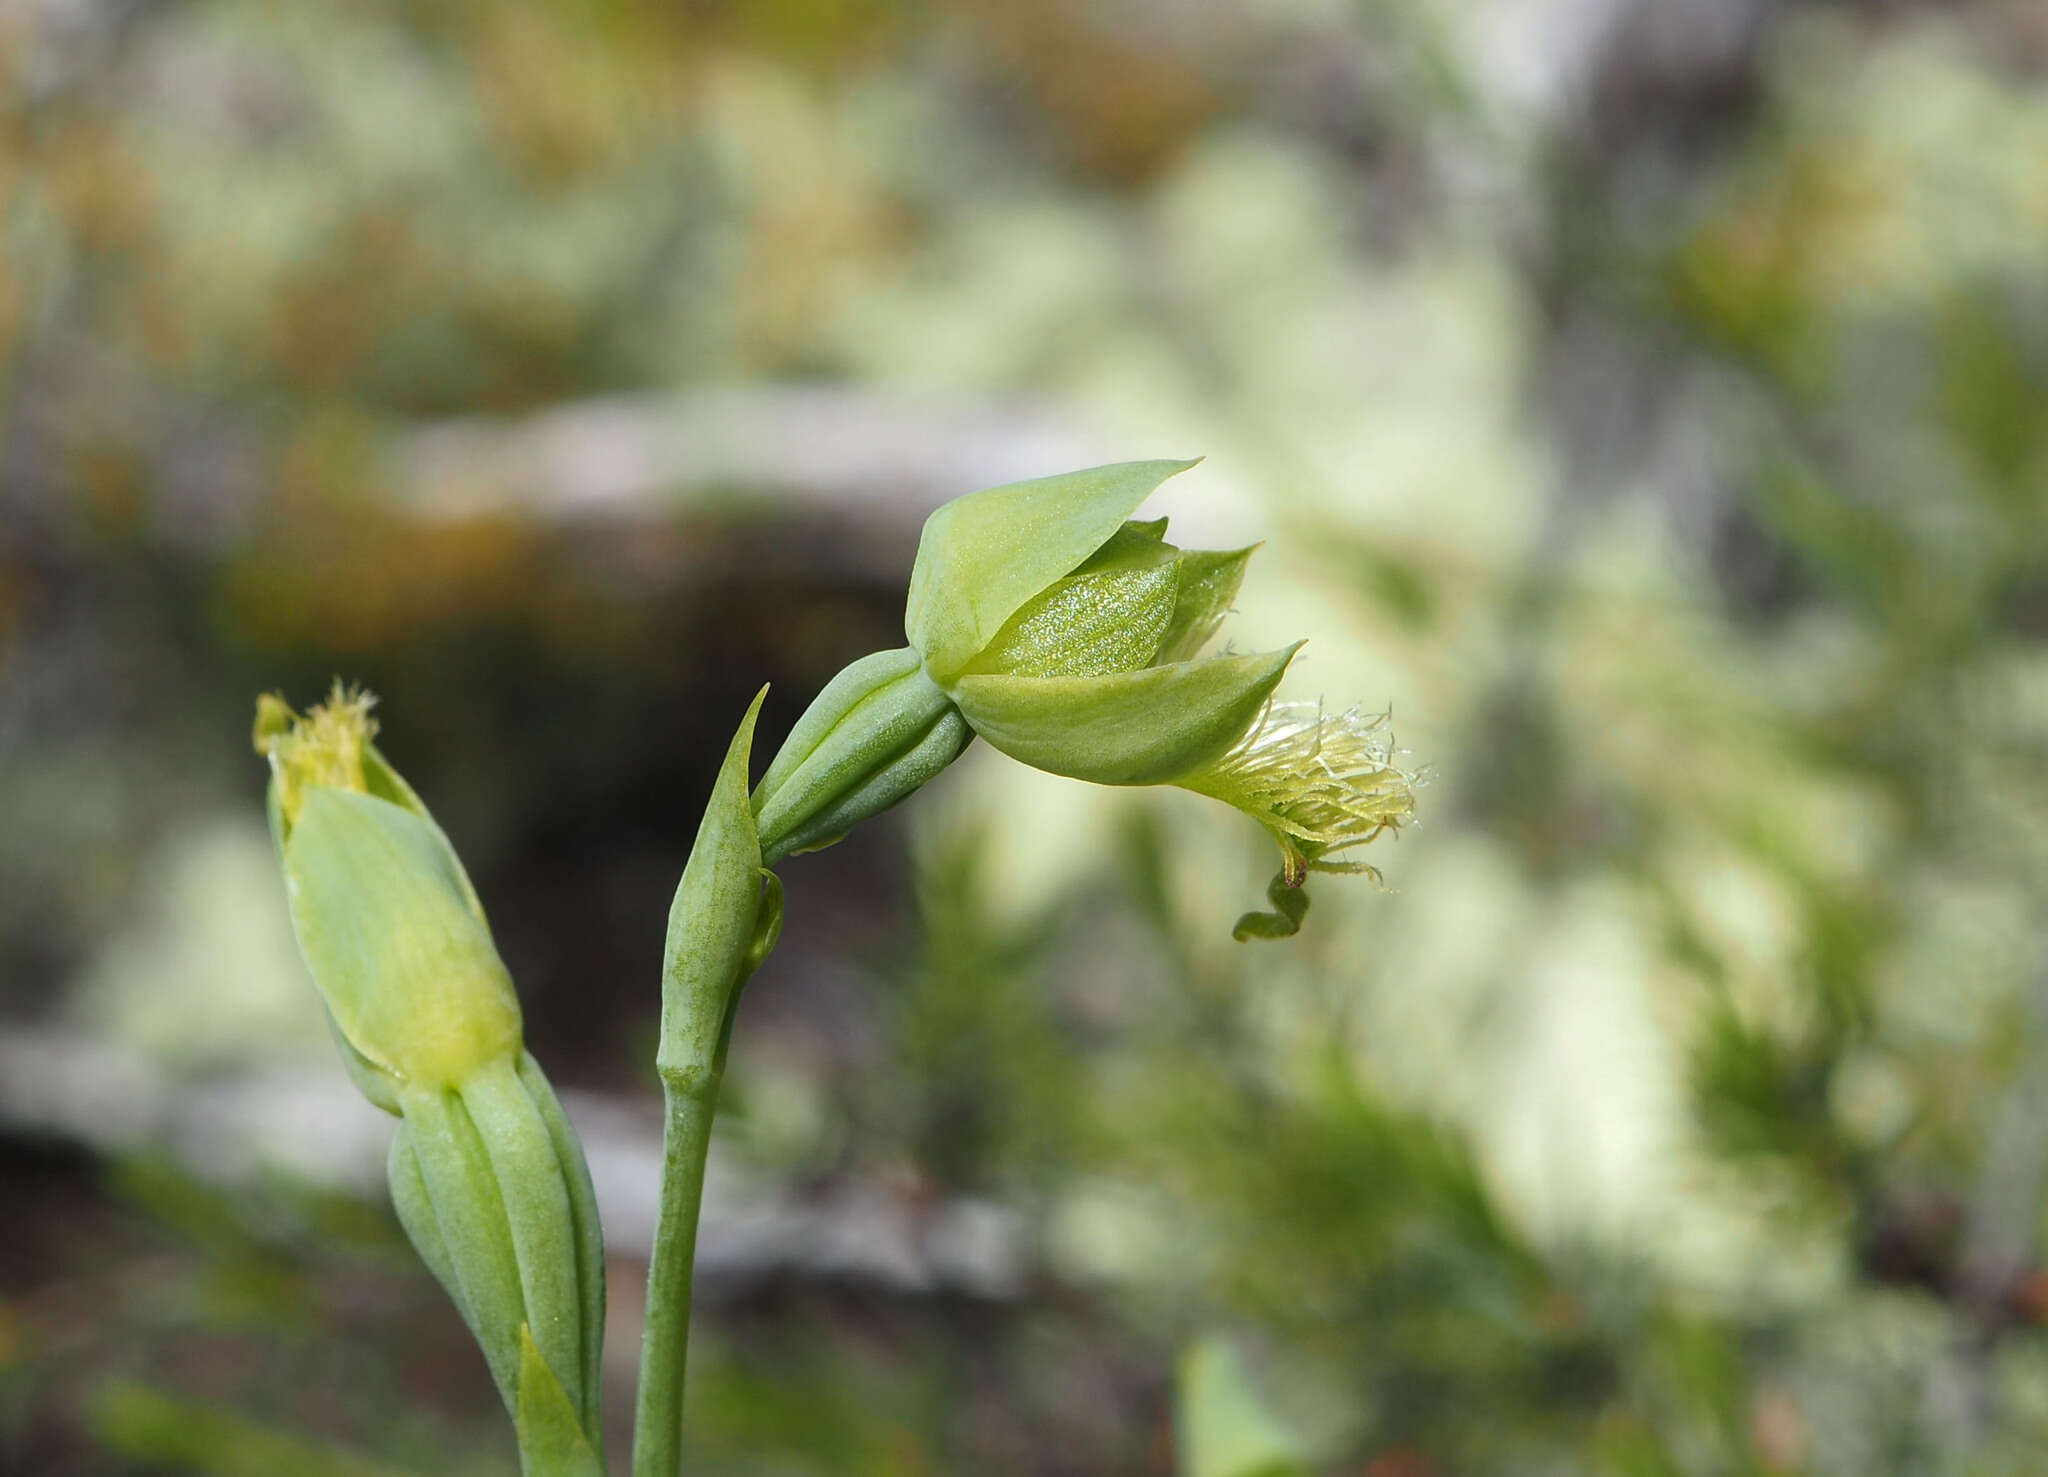 Image of Pale beard orchid